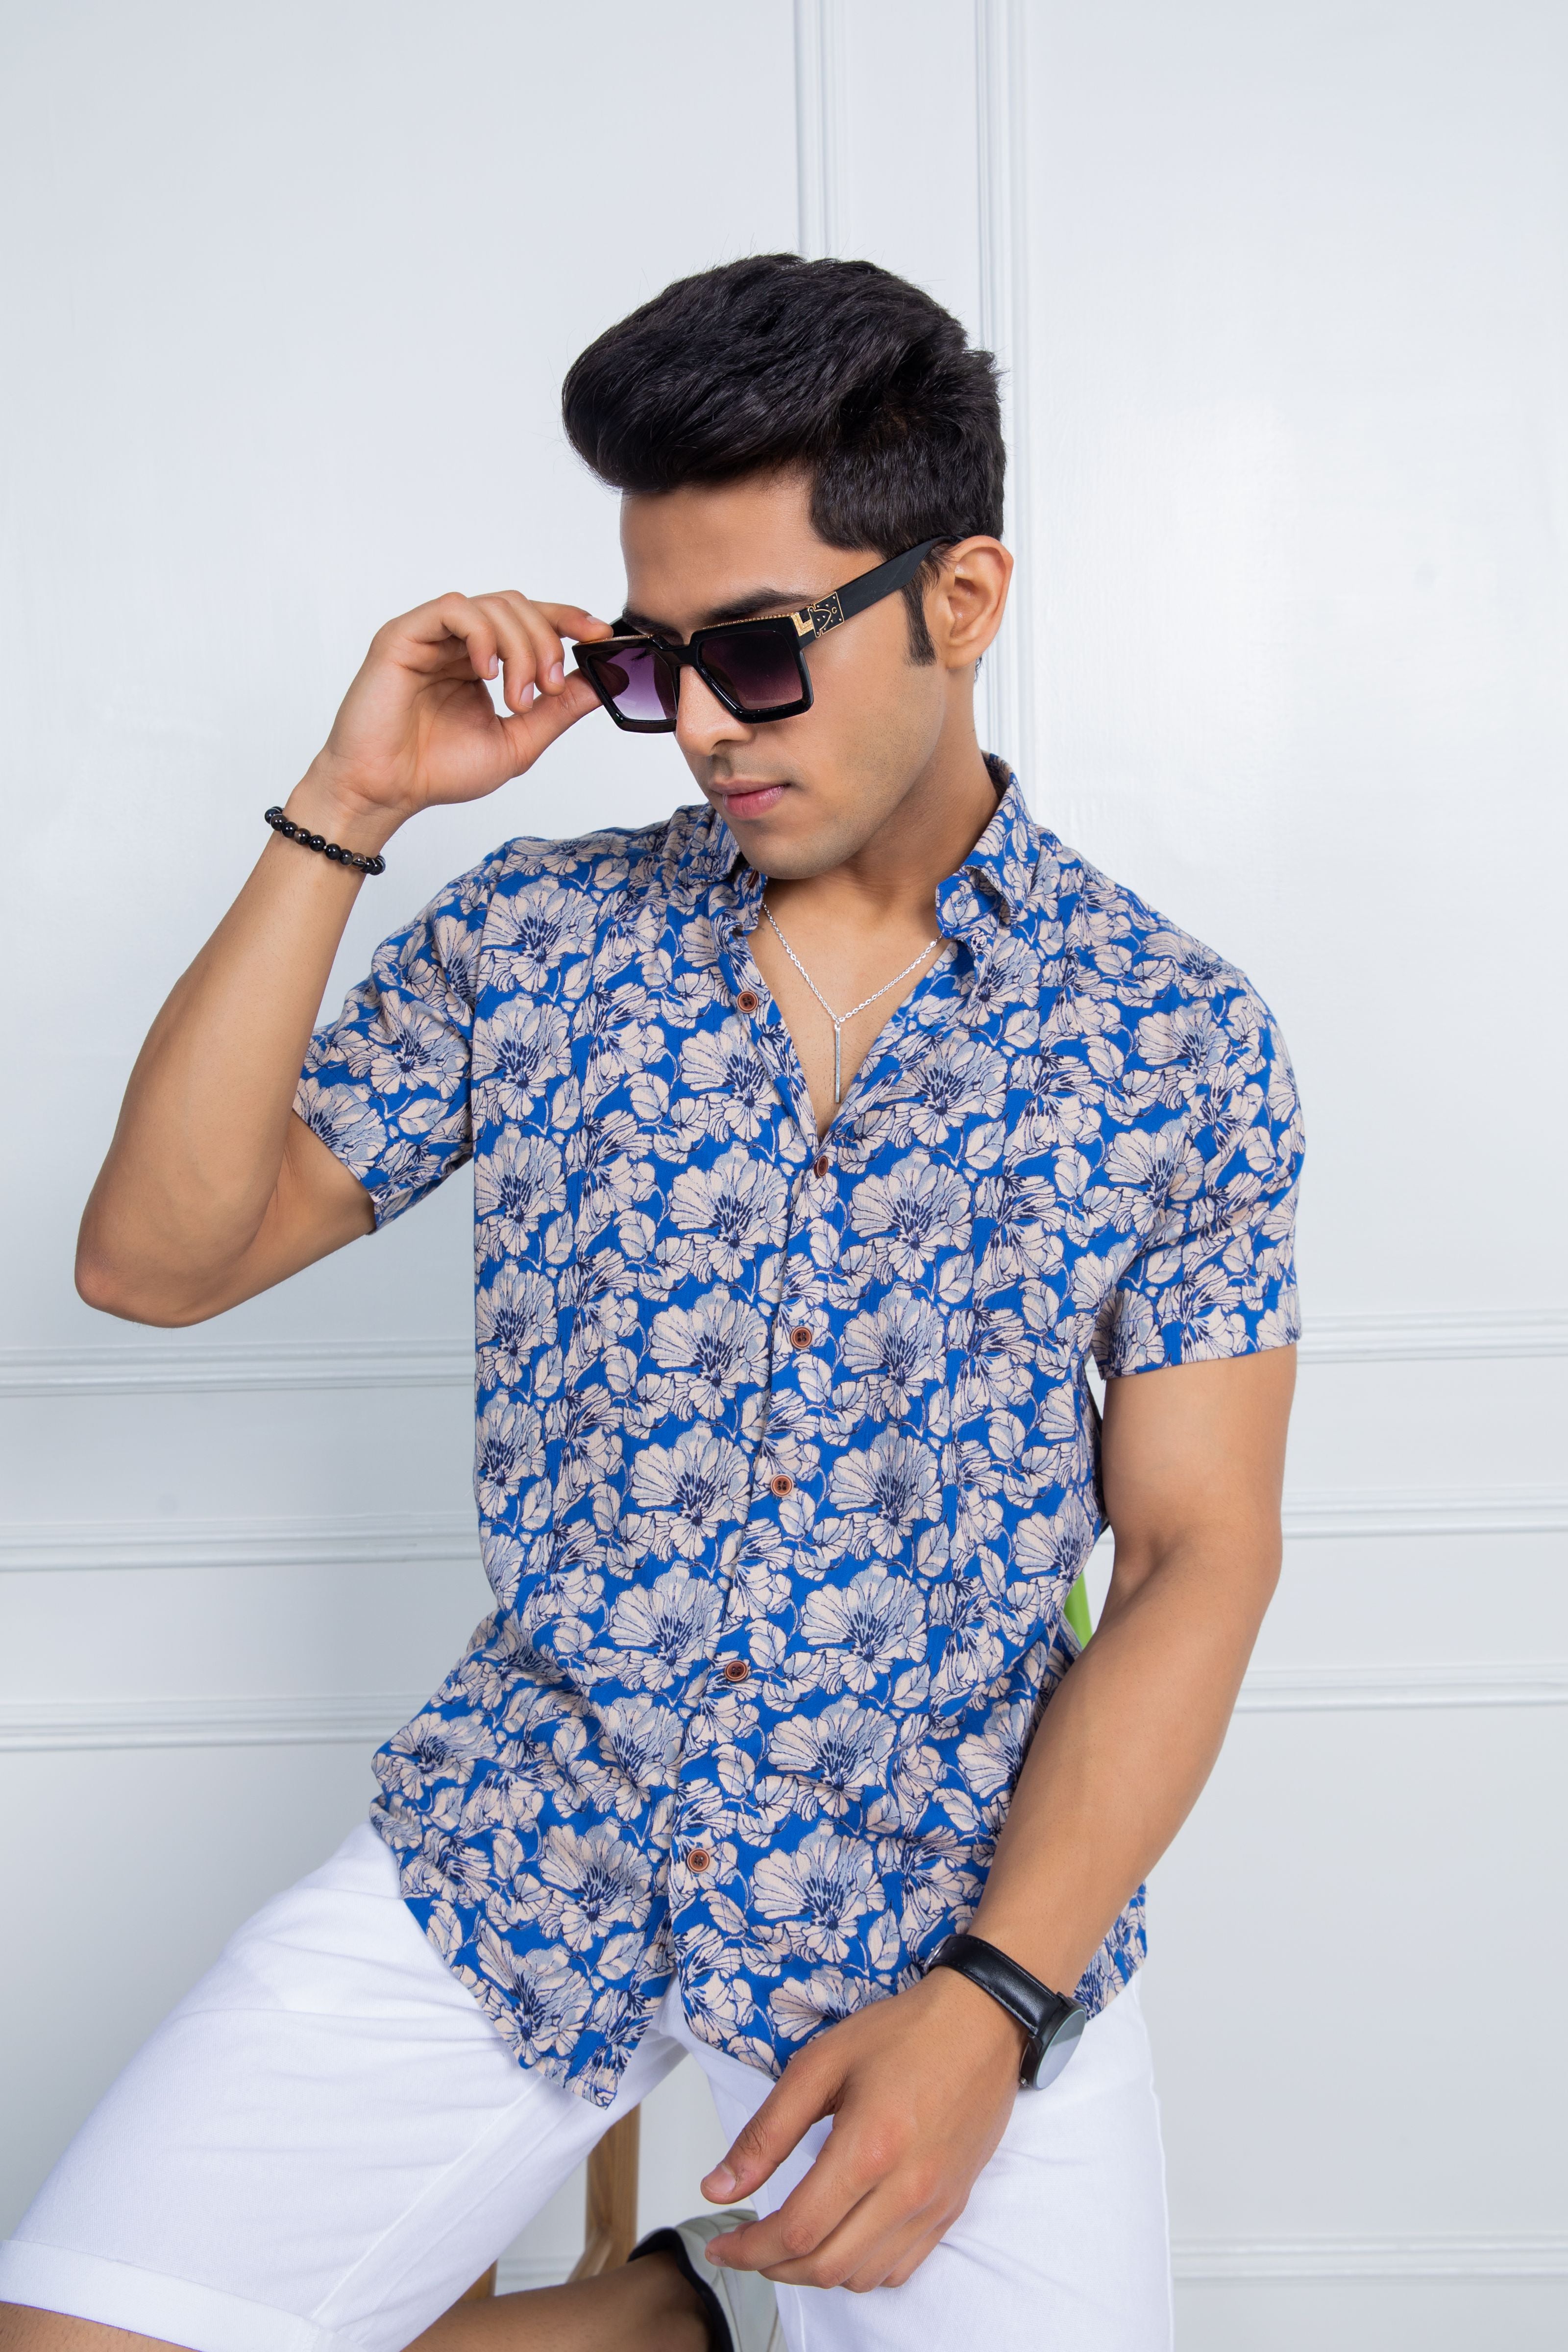 Firangi Yarn Relaxed Fit Super Flowy Re-engineered Cotton Printed Shirt- Half Sleeves (Blue)